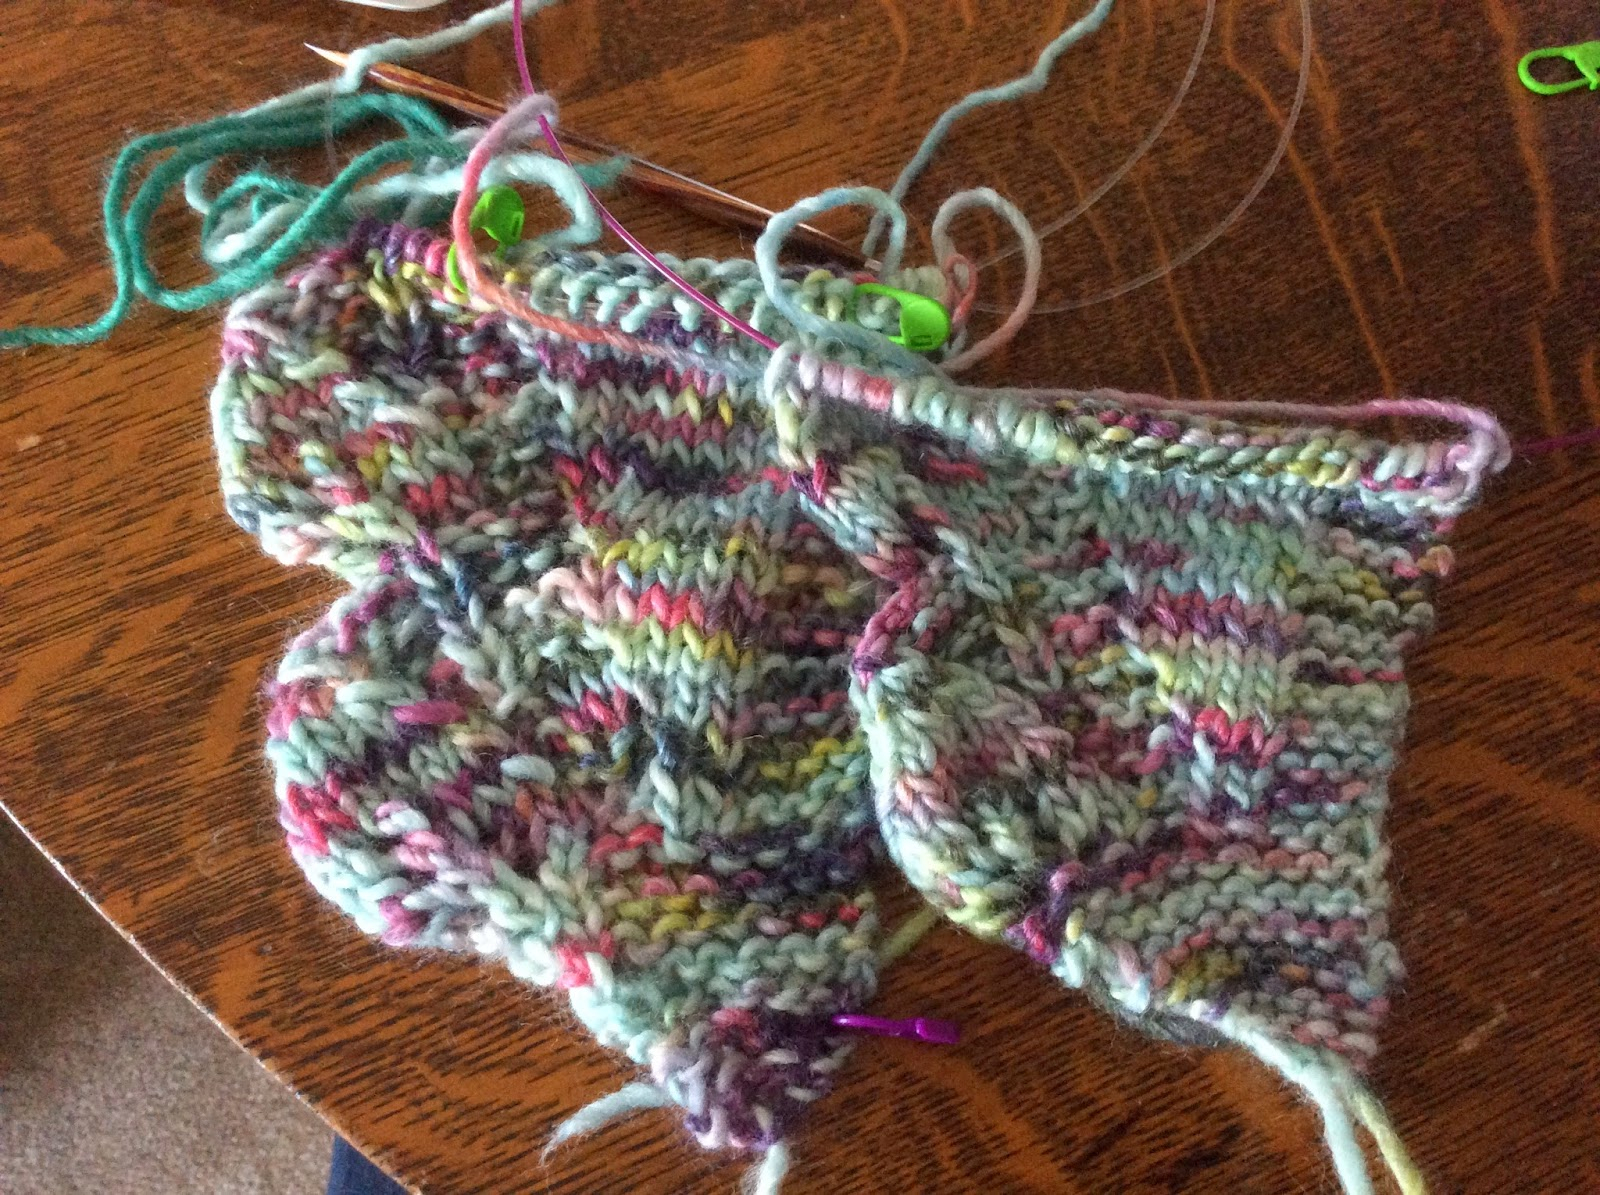 Variegated Yarn Patterns Knitting Cast On And Rip Out Looking For Patterns For Short Change